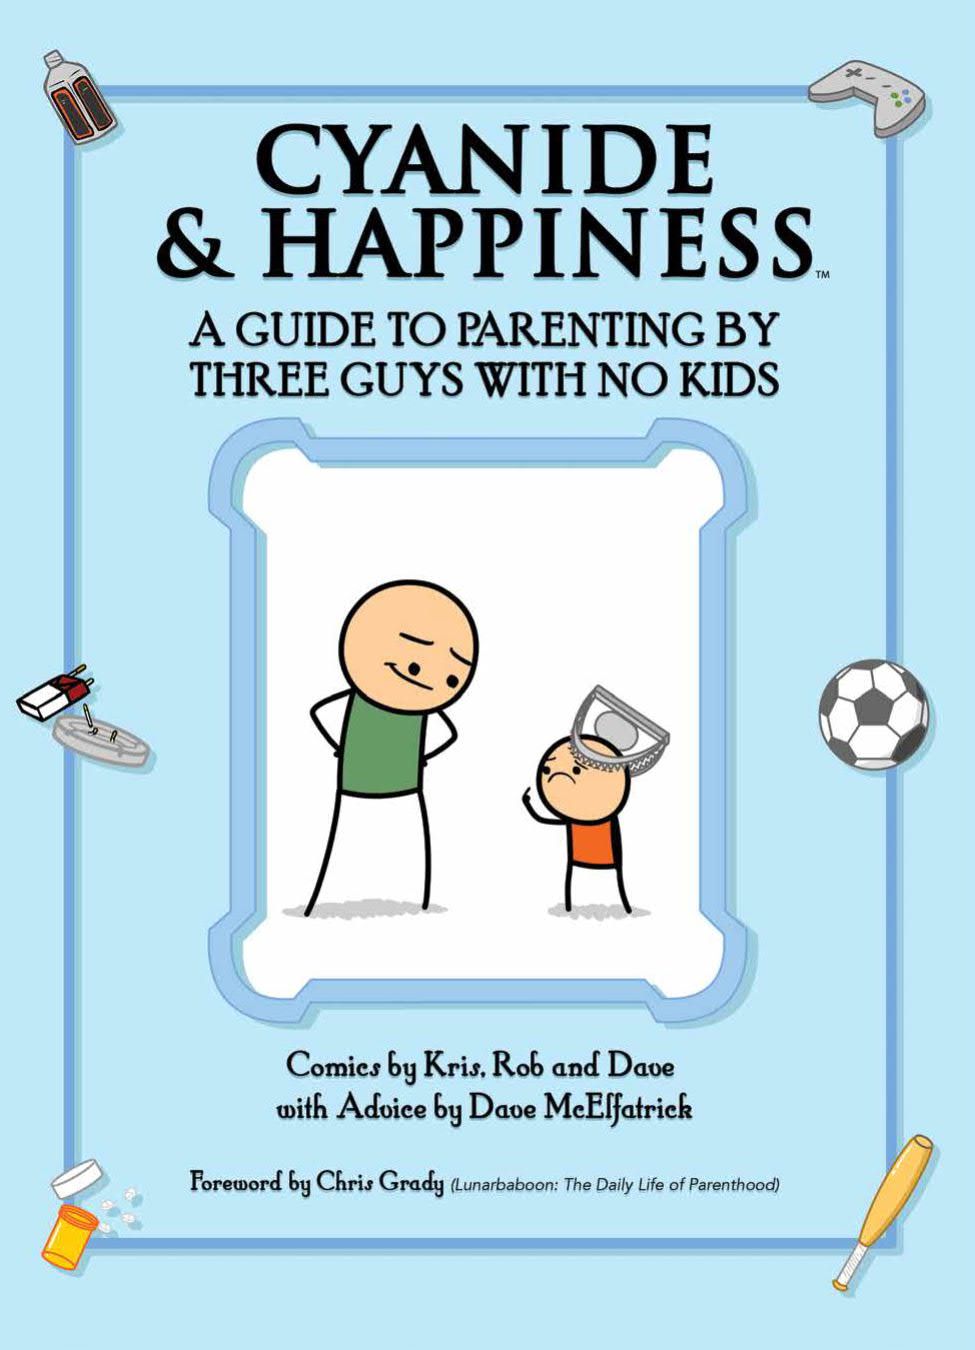 Cyanide & Happiness TP Guide Parenting By 3 Guys With No Kids